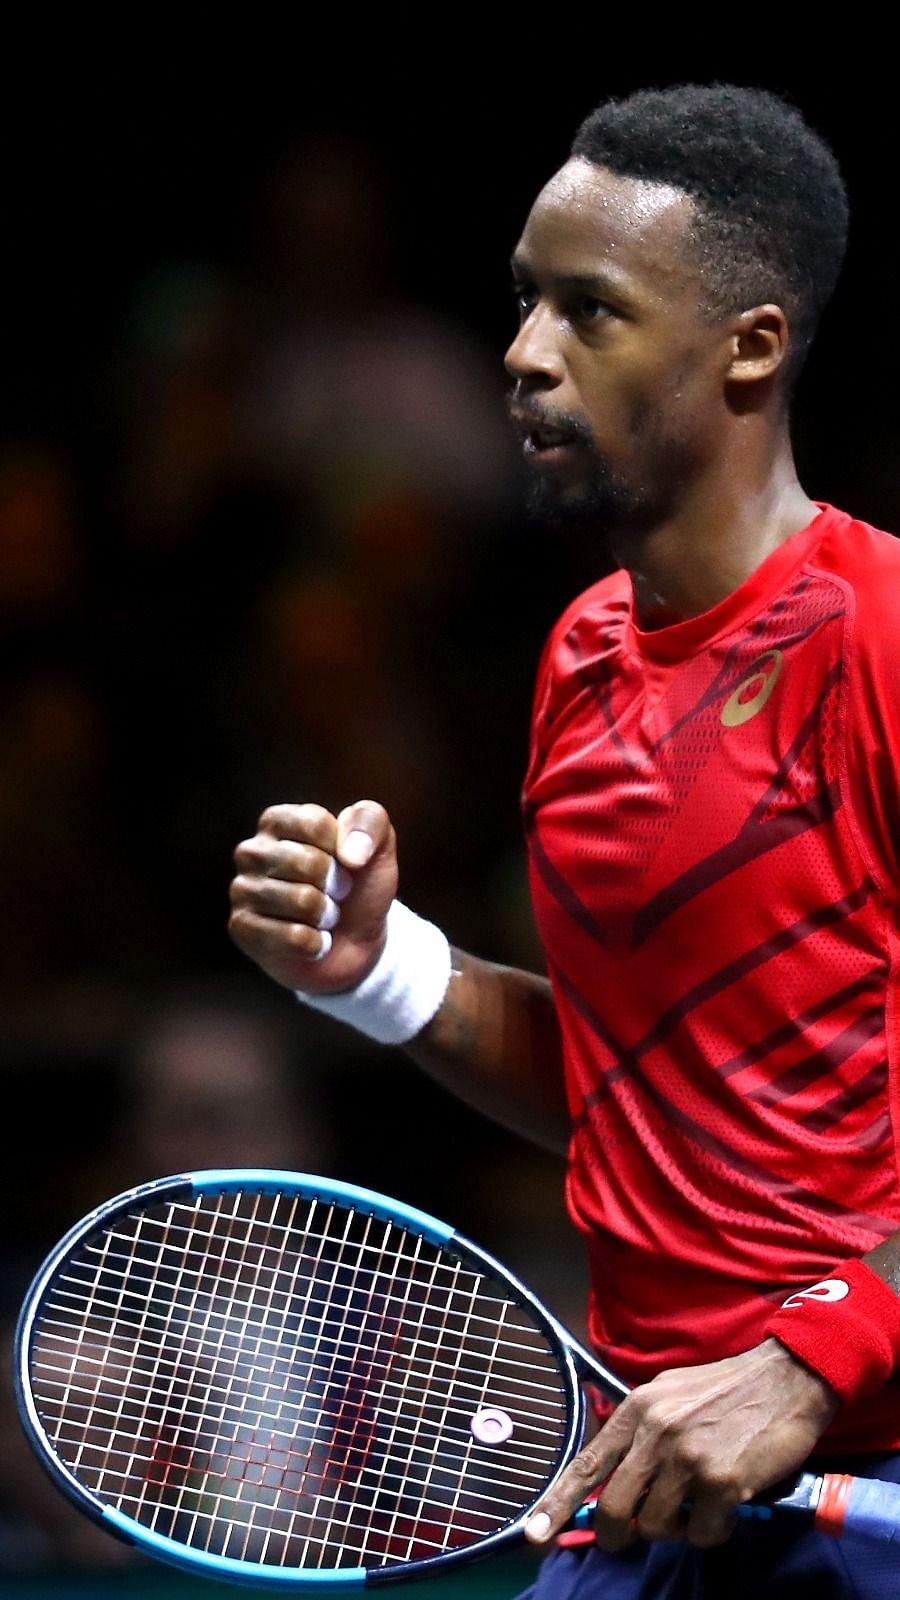 Rotterdam Open 2020, Finals Gael Monfils vs Felix Auger-Aliassime Where to watch and live stream details